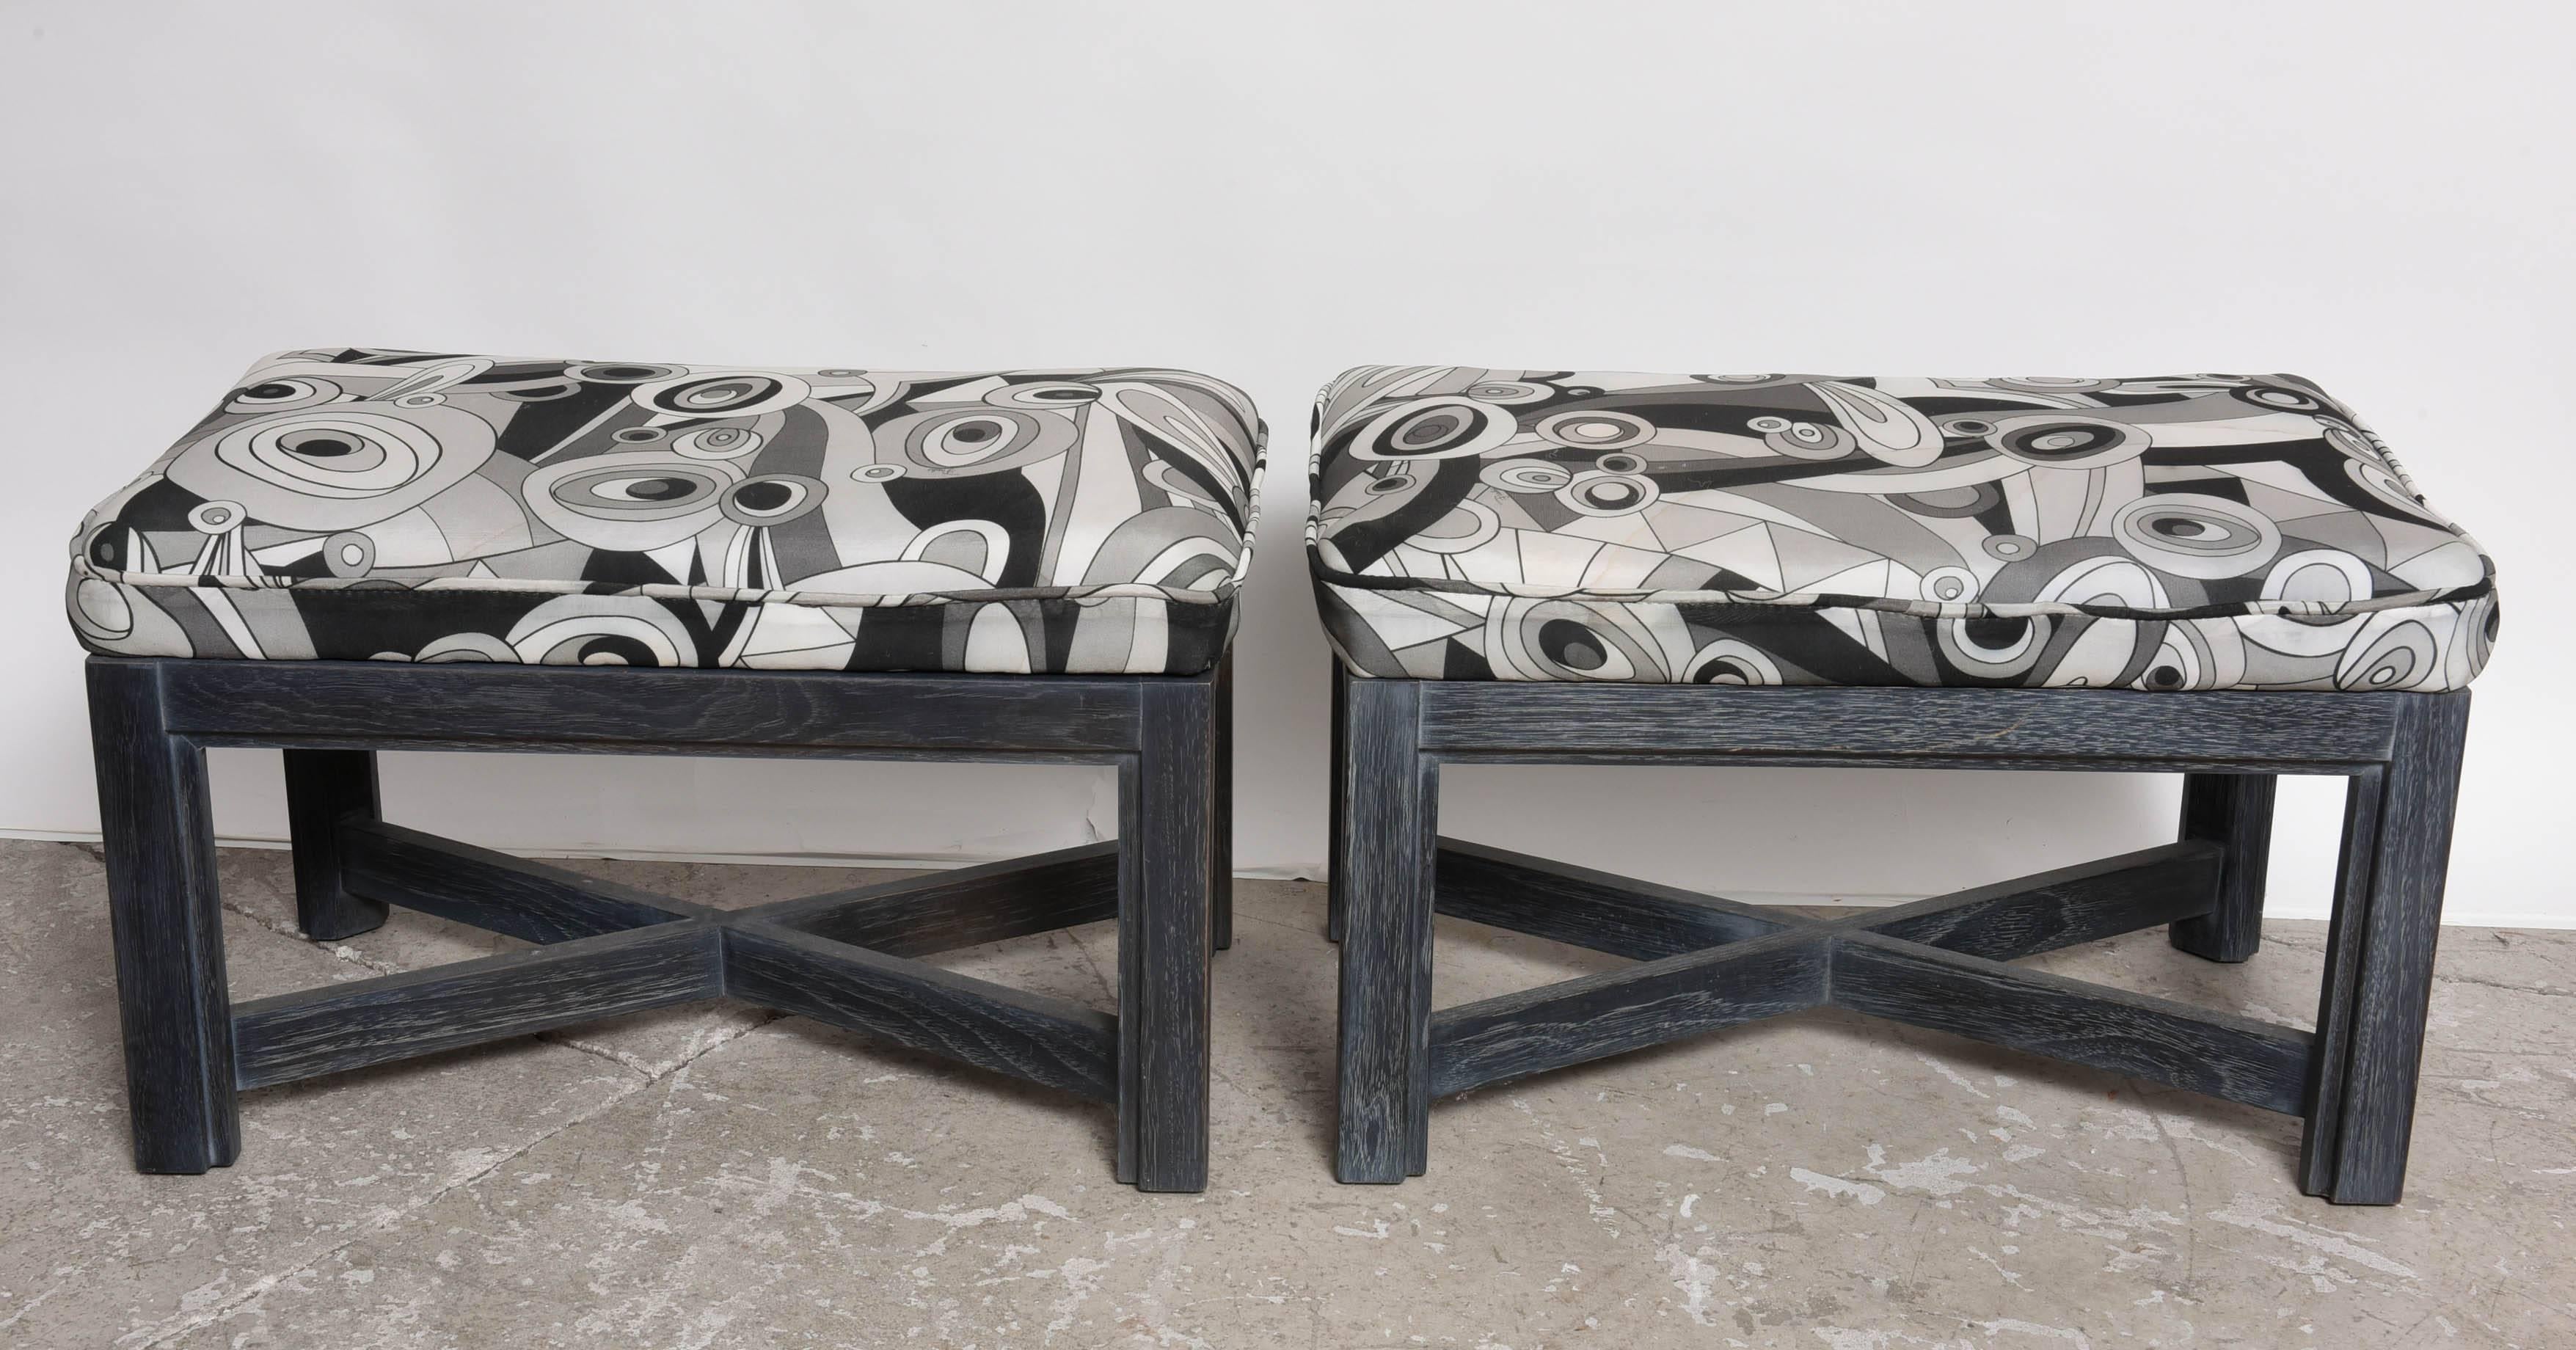 Beautiful pair of Cerrused Oak X base stool. They are a black - charcoal grey color Cerrused finish , foam upholstered in Picci fabric, some soiling on fabric .